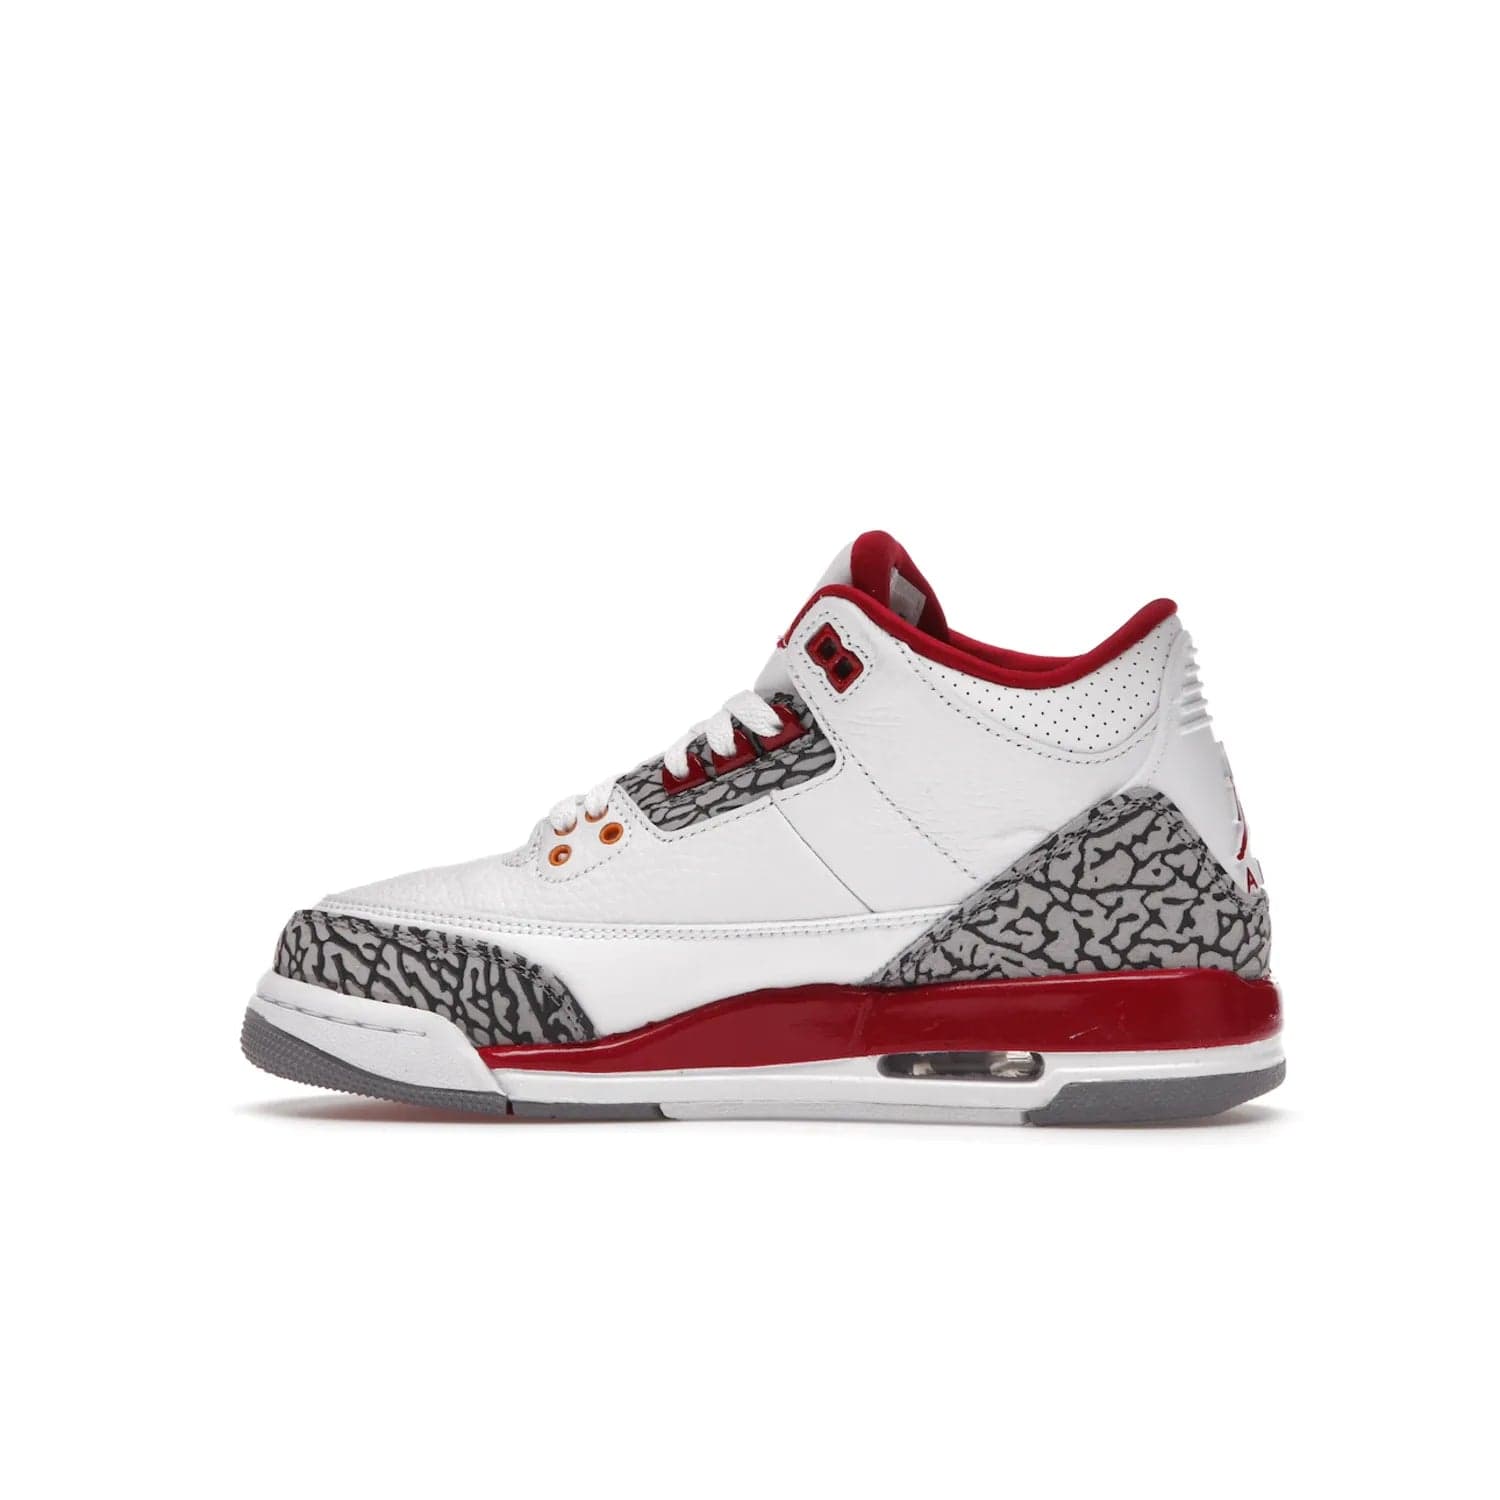 Jordan 3 Retro Cardinal (GS) - Image 20 - Only at www.BallersClubKickz.com - Shop the kid-sized Air Jordan 3 Retro Cardinal GS, released Feb 2022. White tumbled leather upper, light curry accenting, cement grey and classic red details throughout. Visible Air cushioning, midsole, and an eye-catching outsole. Show off your style with this fashionable streetwear silhouette.